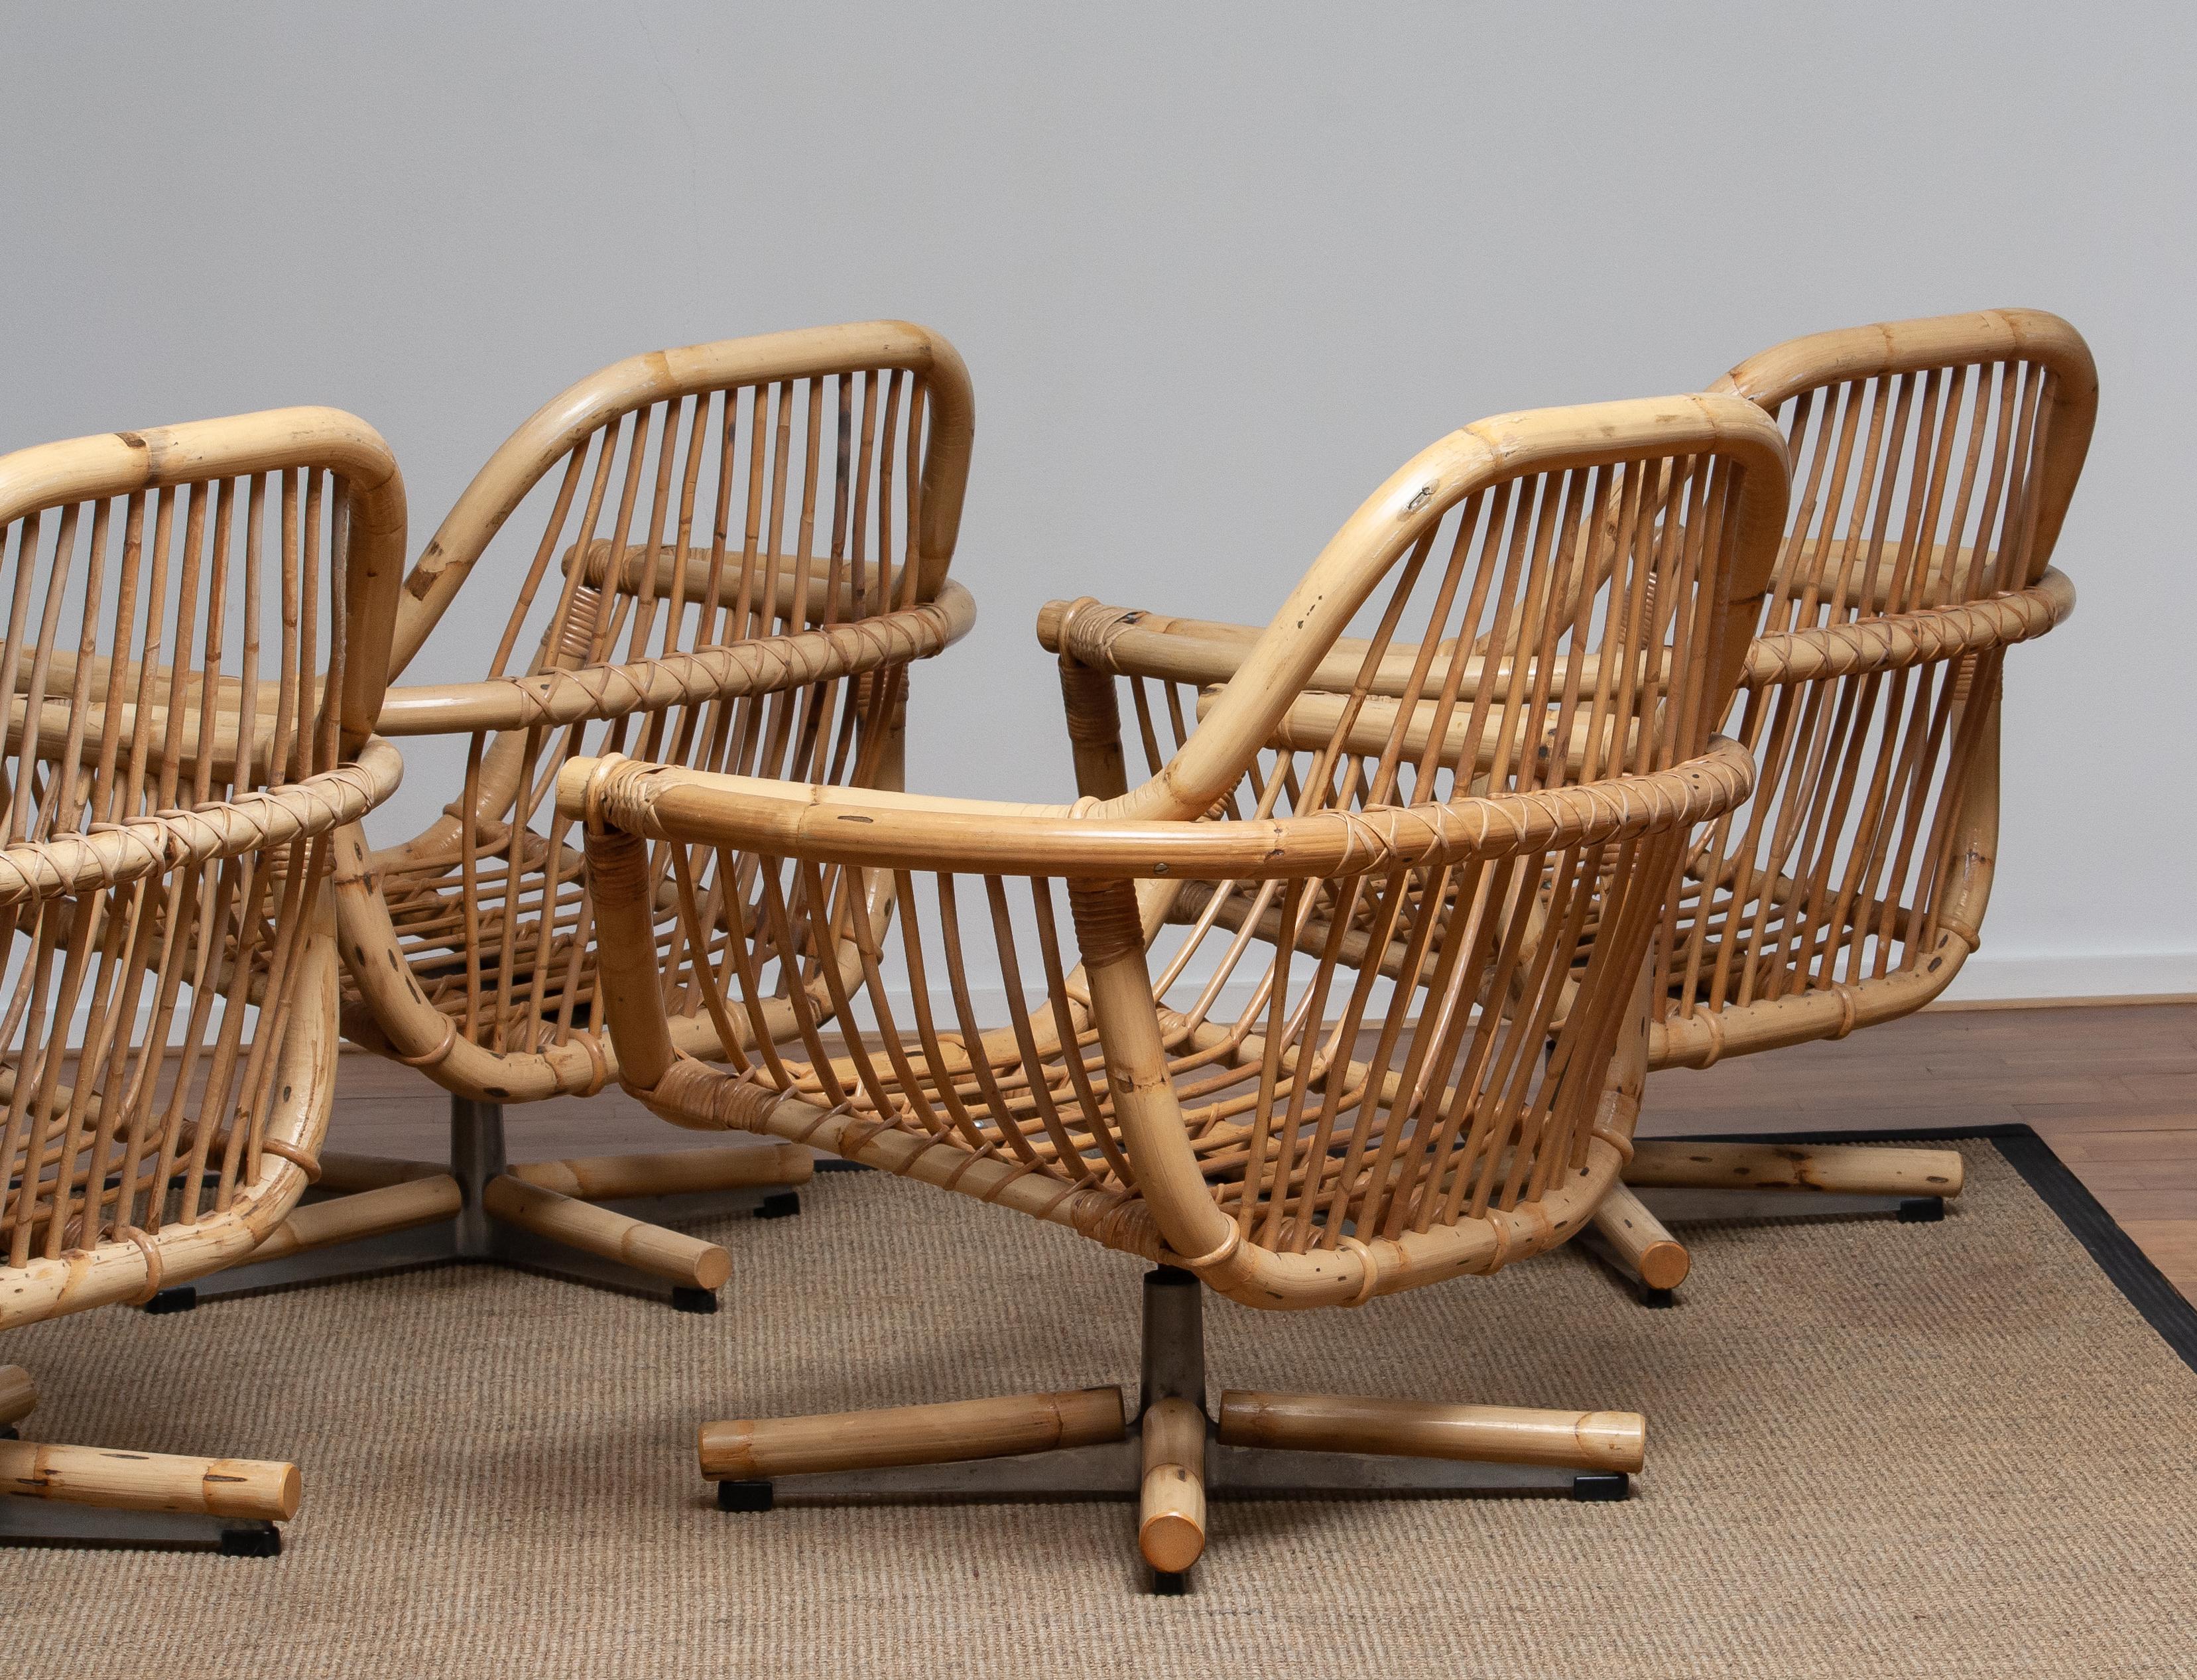 1960s Rattan Garden Set / Lounge Set Consist Five Swivel Chairs and Coffee Table 13